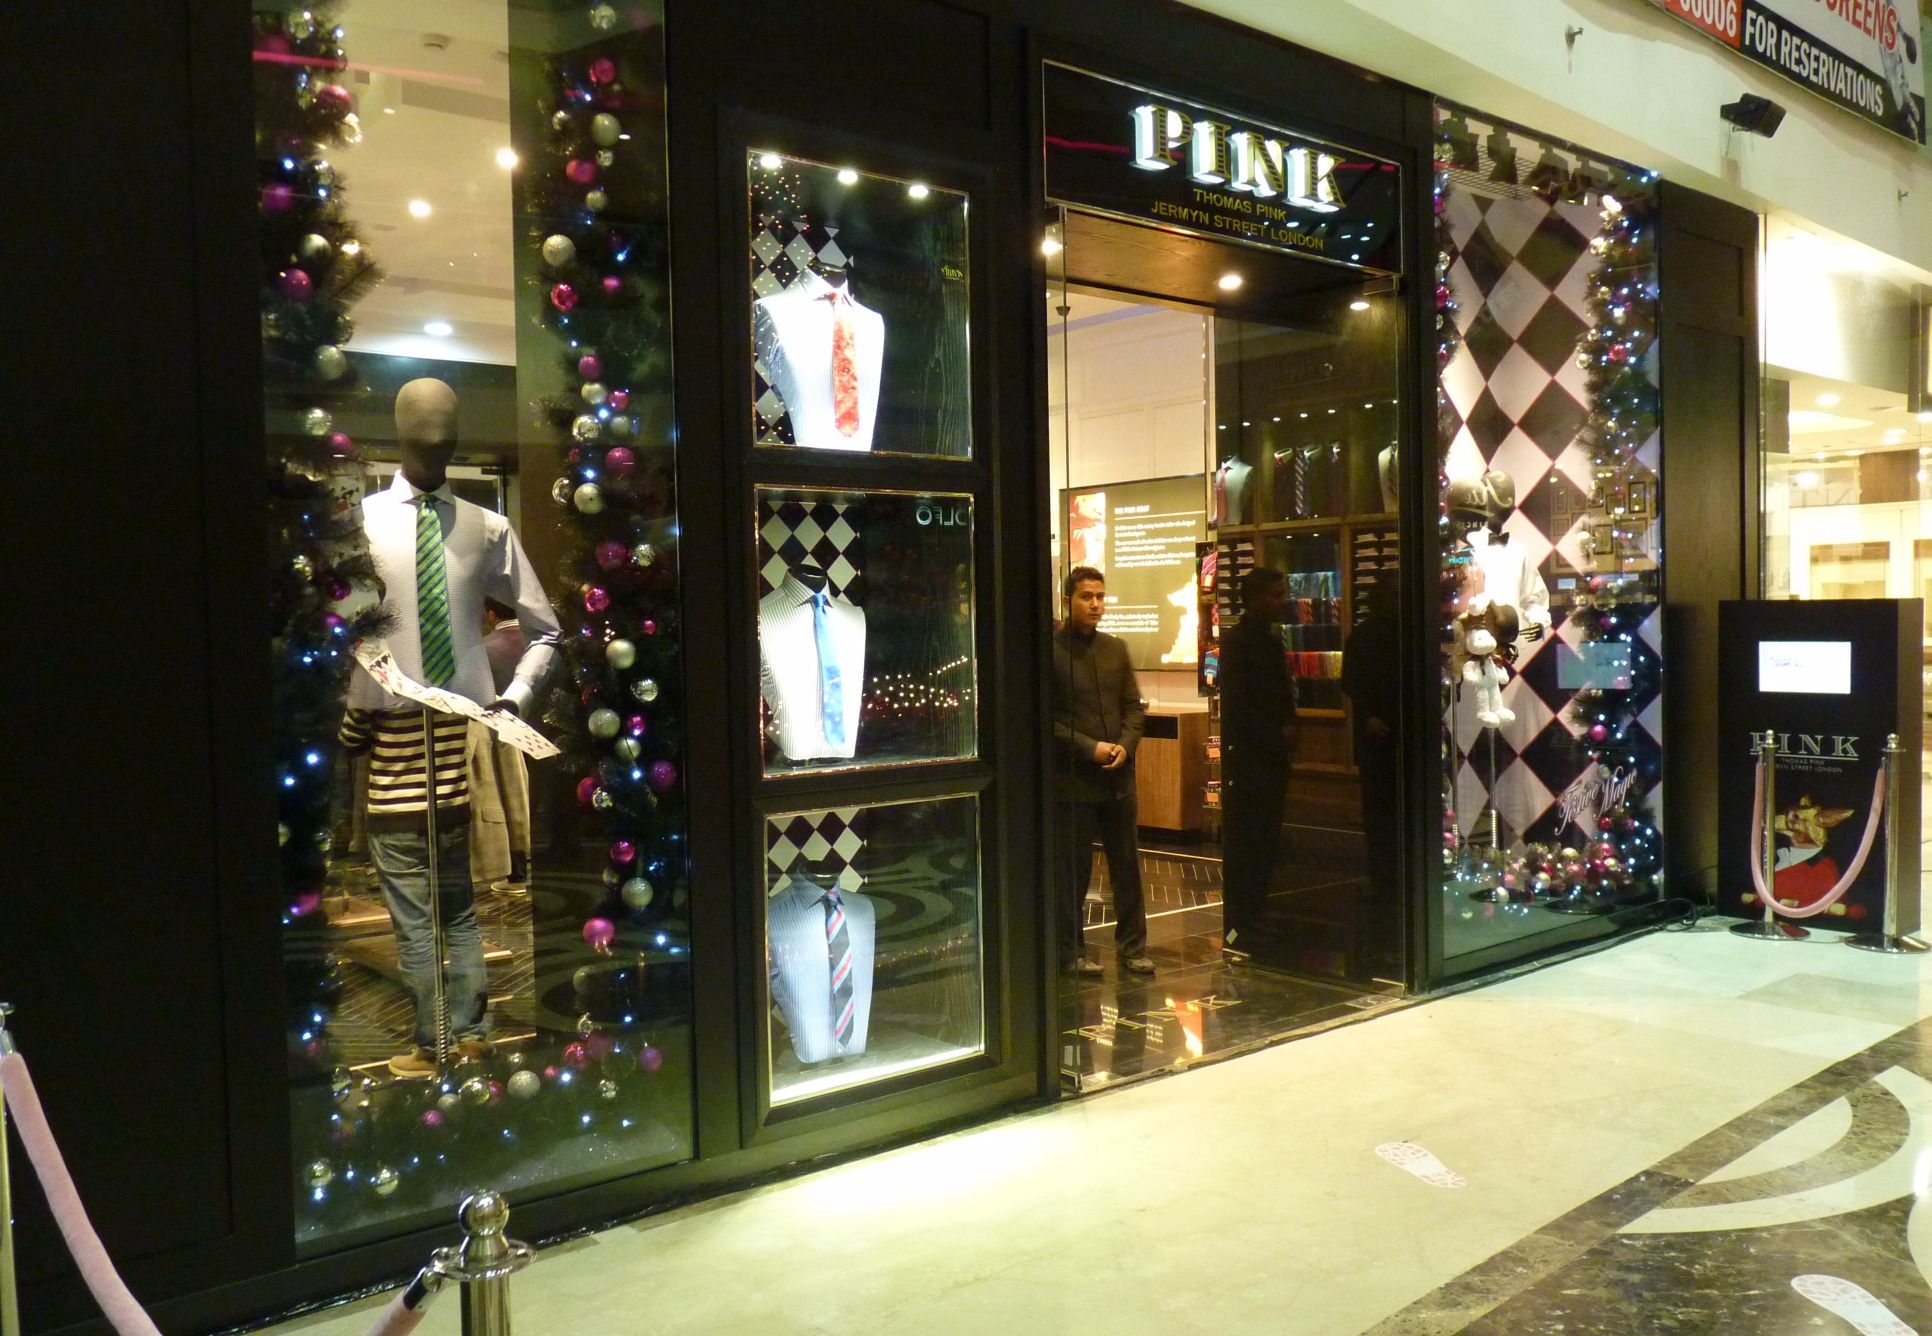 Outside view of the Thomas Pink store in Ambience Mall